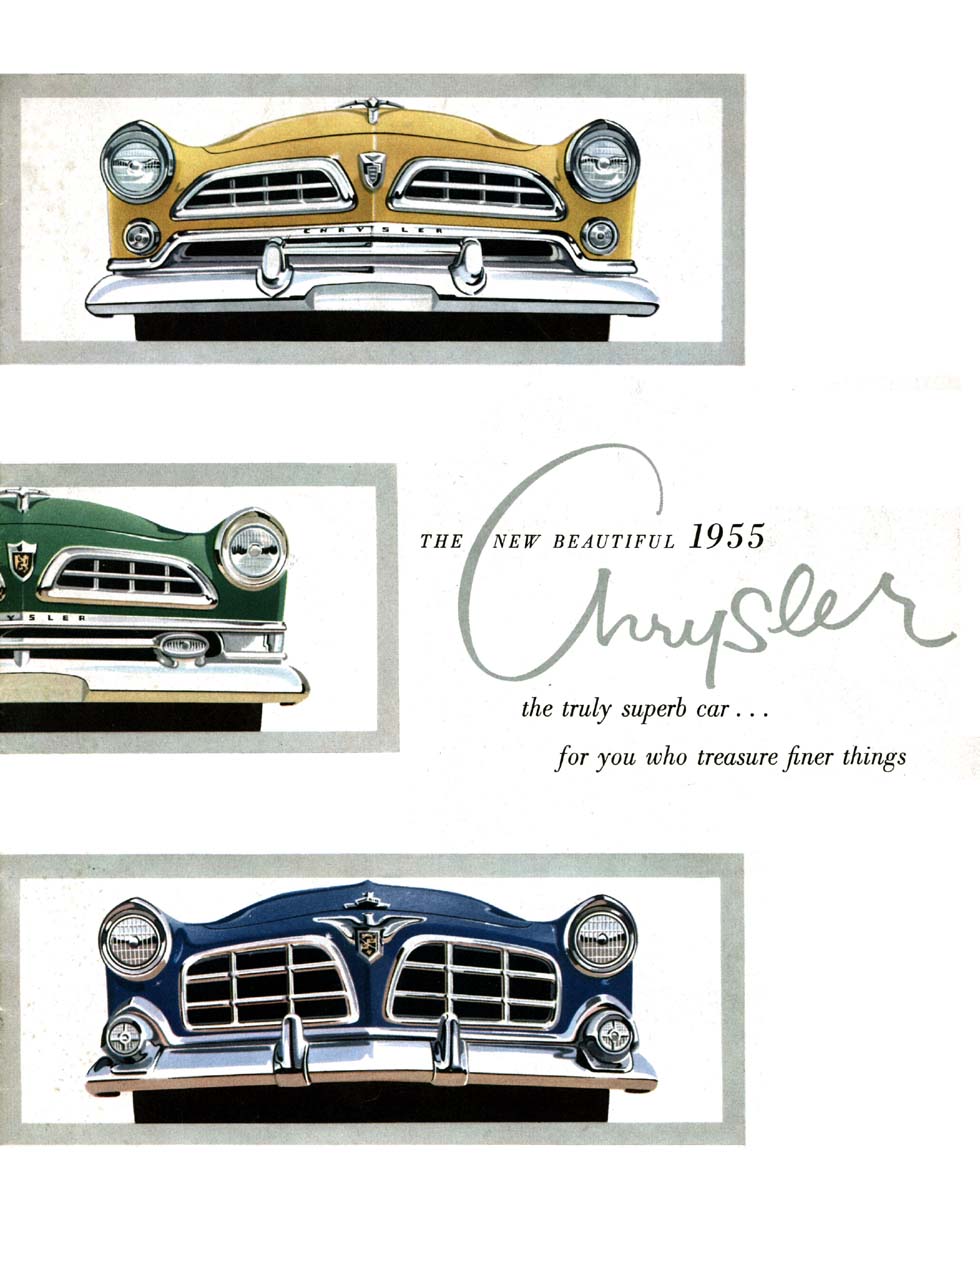 1955 Chrysler Canadian Brochure Page 1